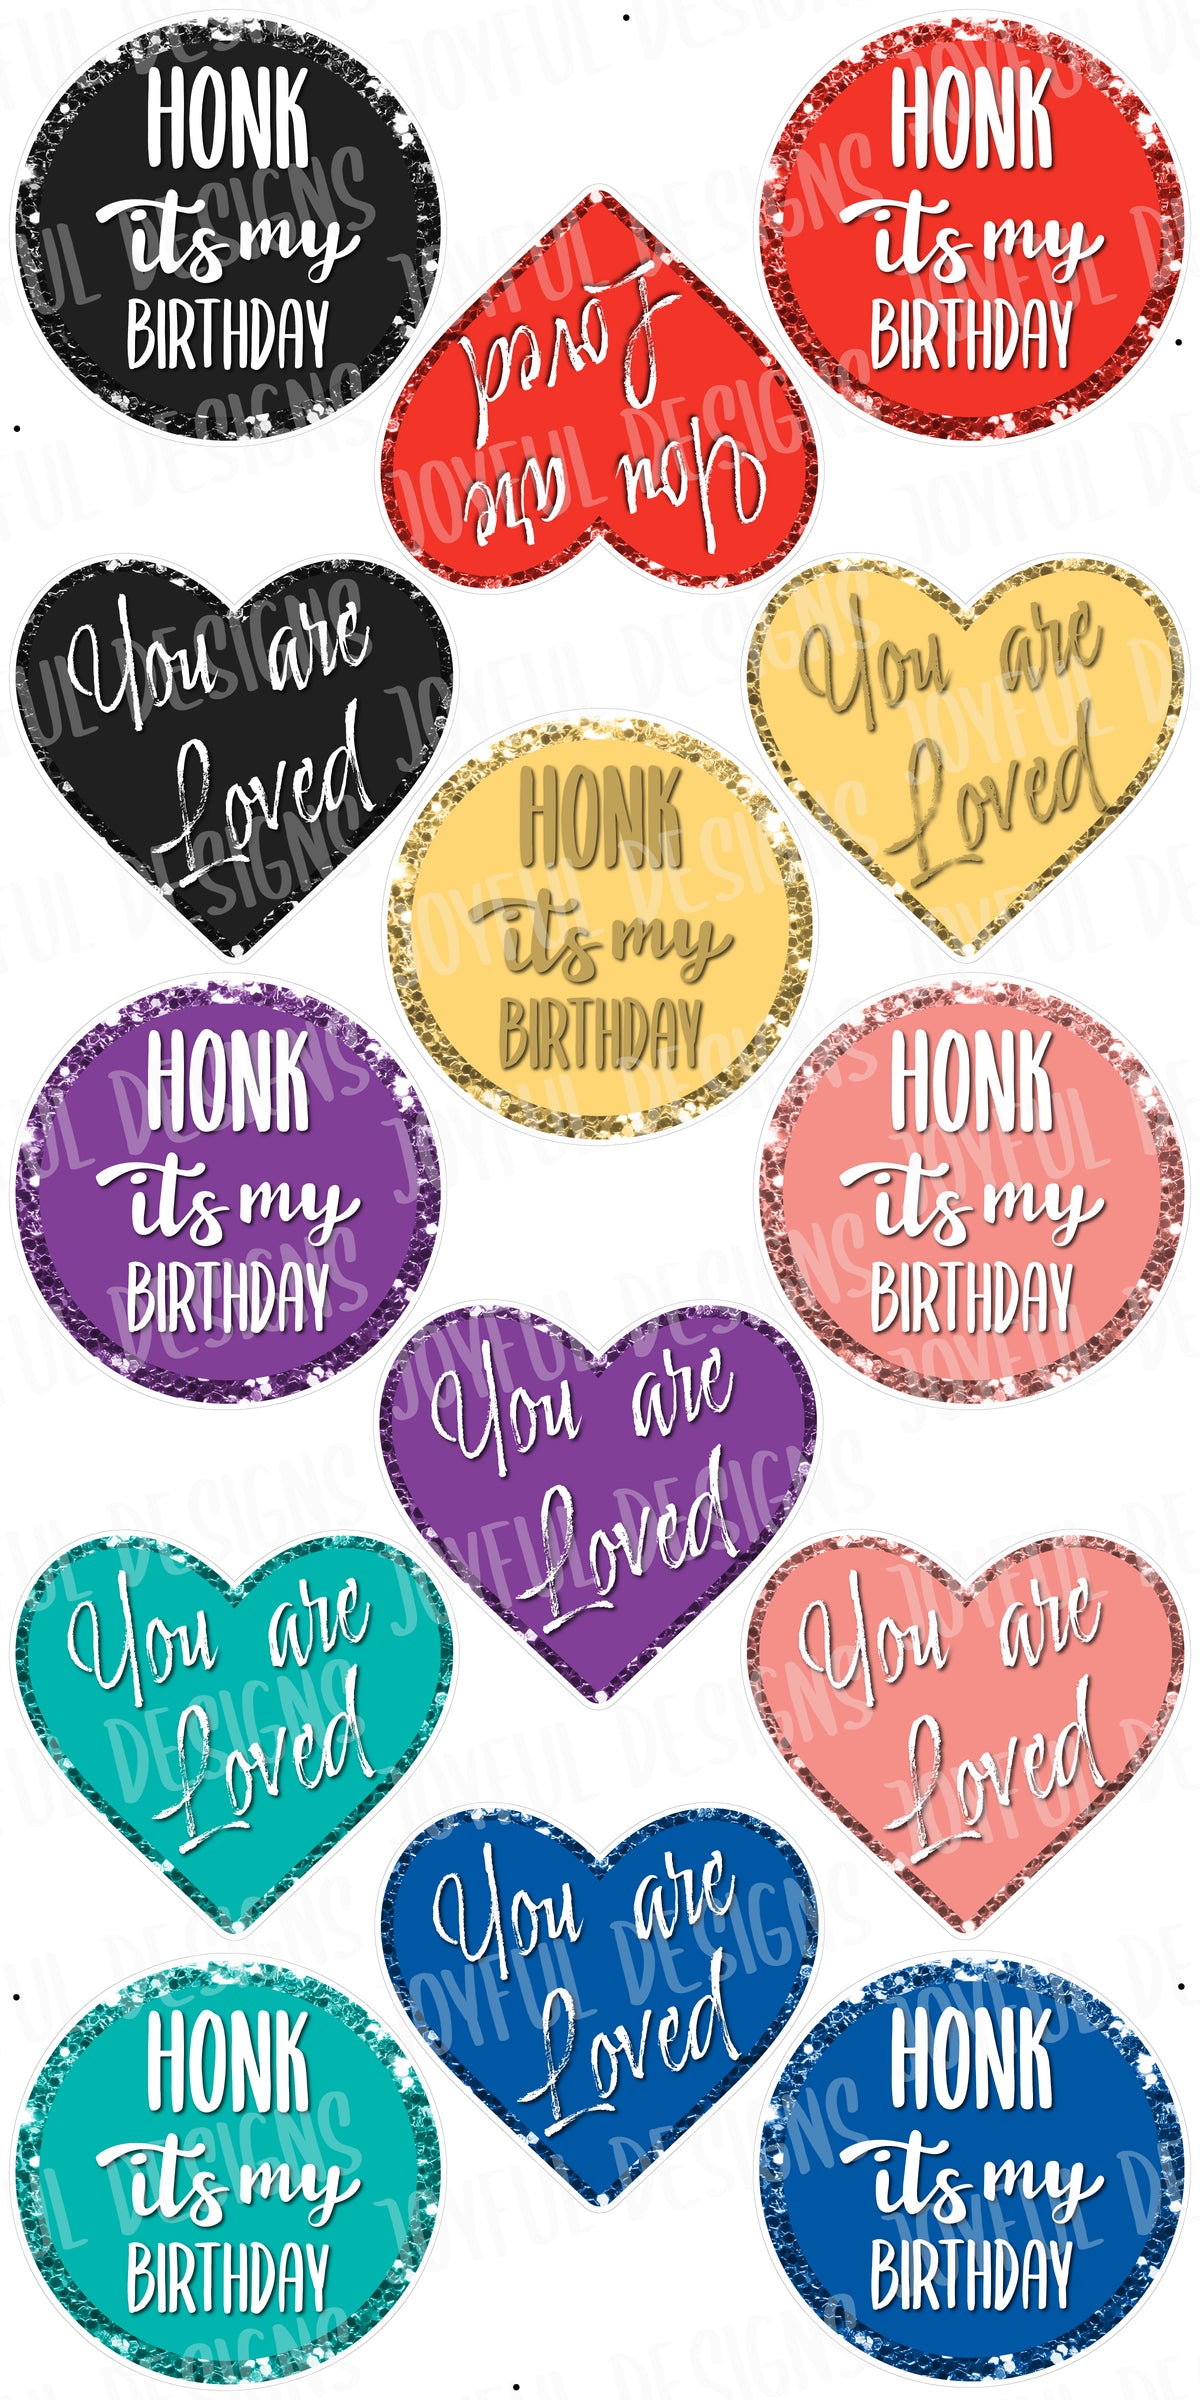 Honk It's My Birthday & You are Loved Flair - 14 Pieces - Choose Your 7 Colors